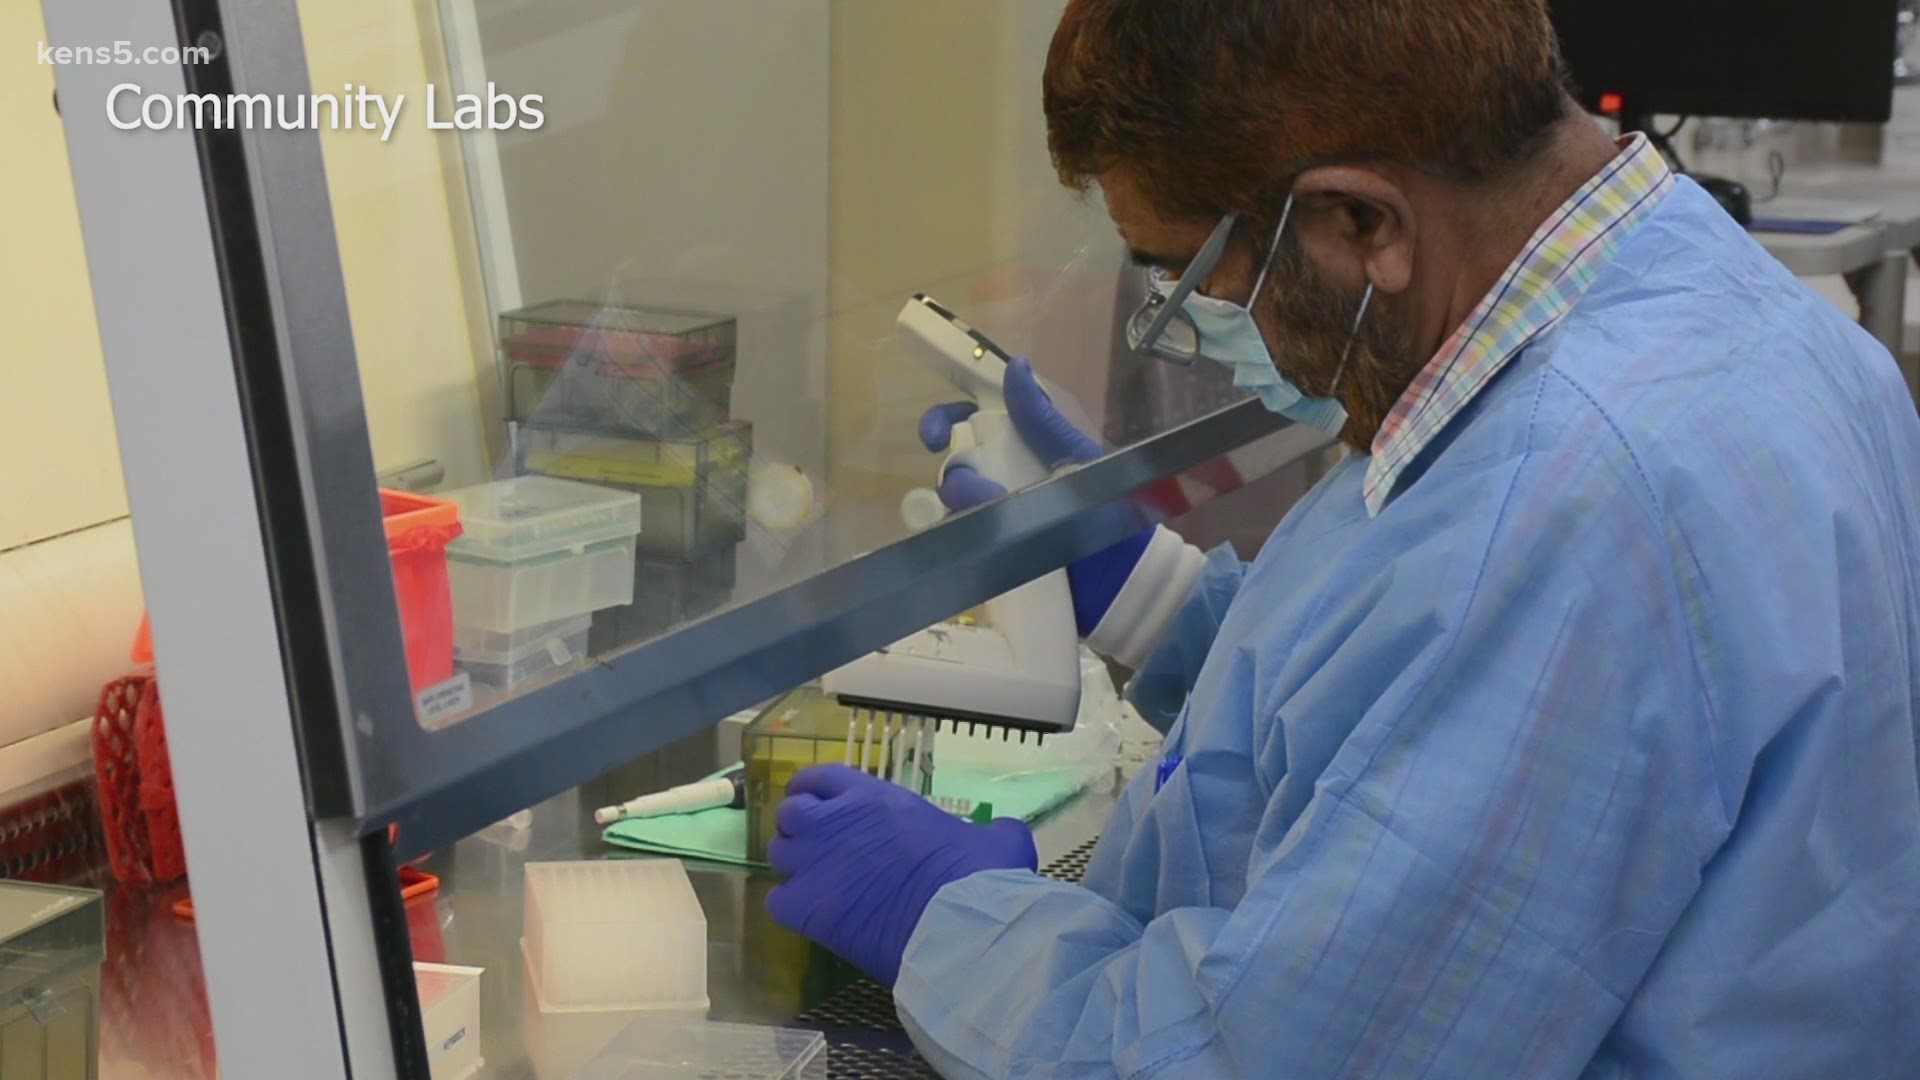 Non-profit Community Labs is expanding its asymptomatic testing in San Antonio as demand keeps growing.